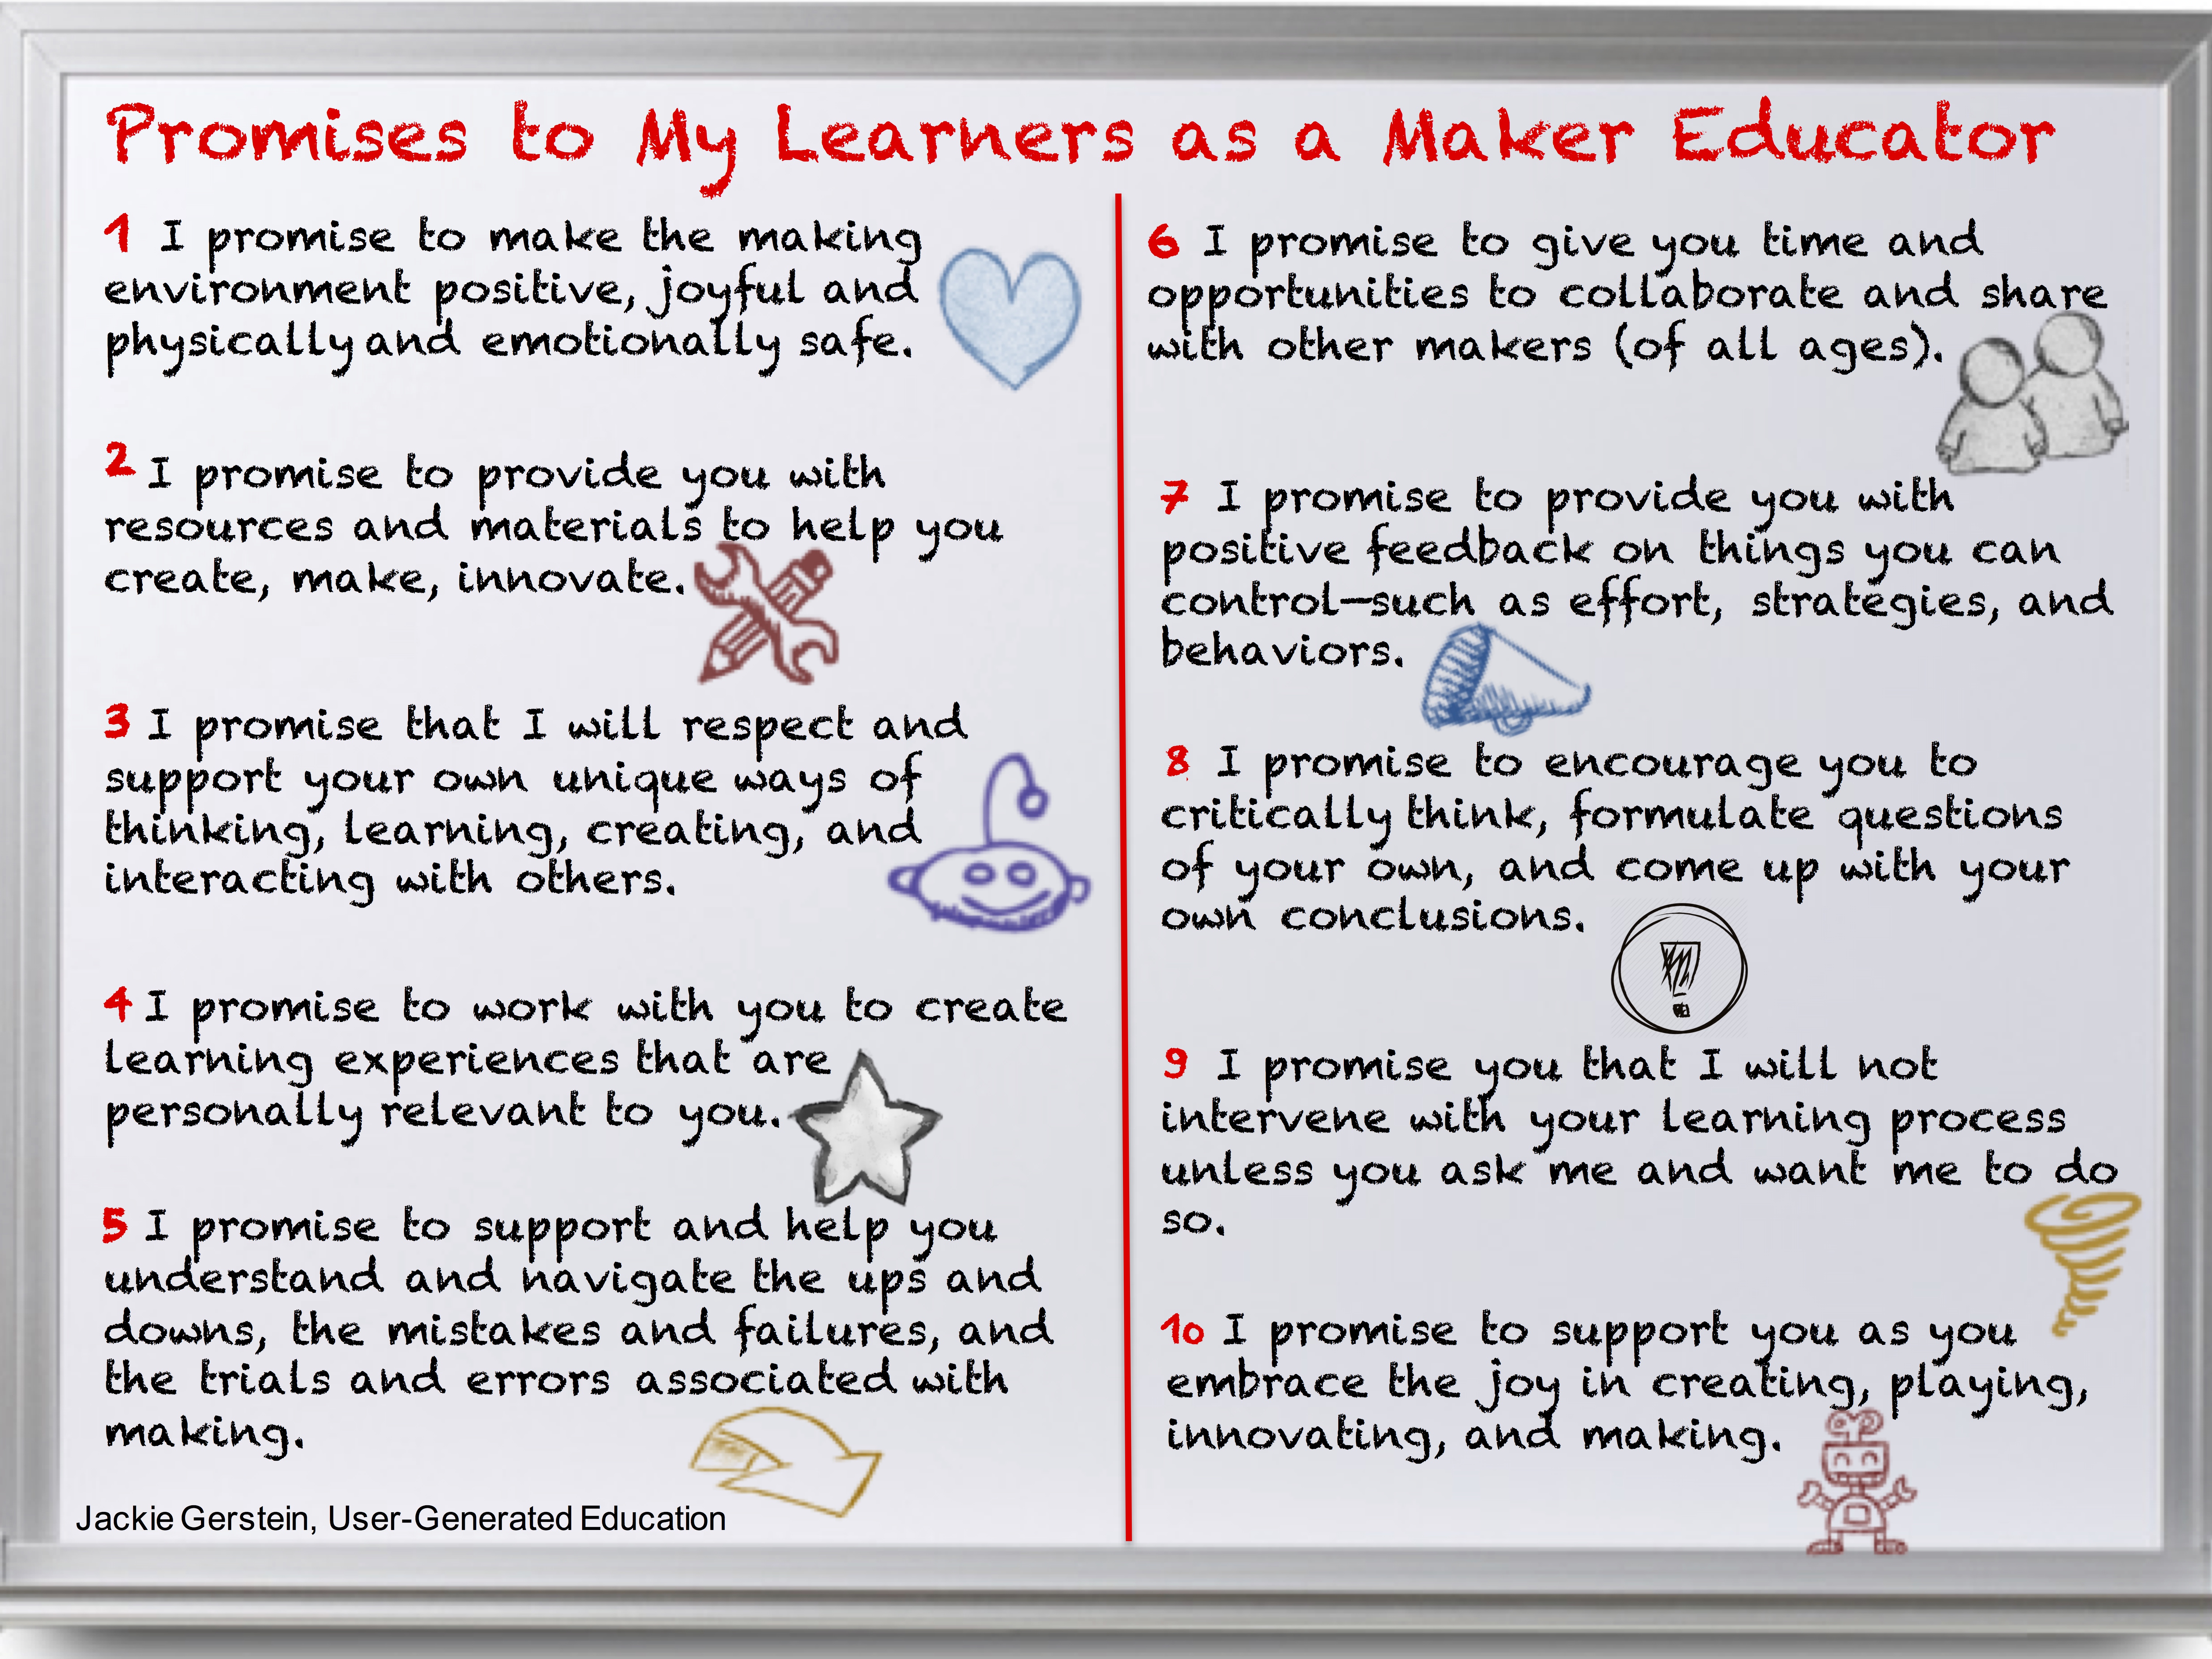 Promises to My Learners as a Maker Educator